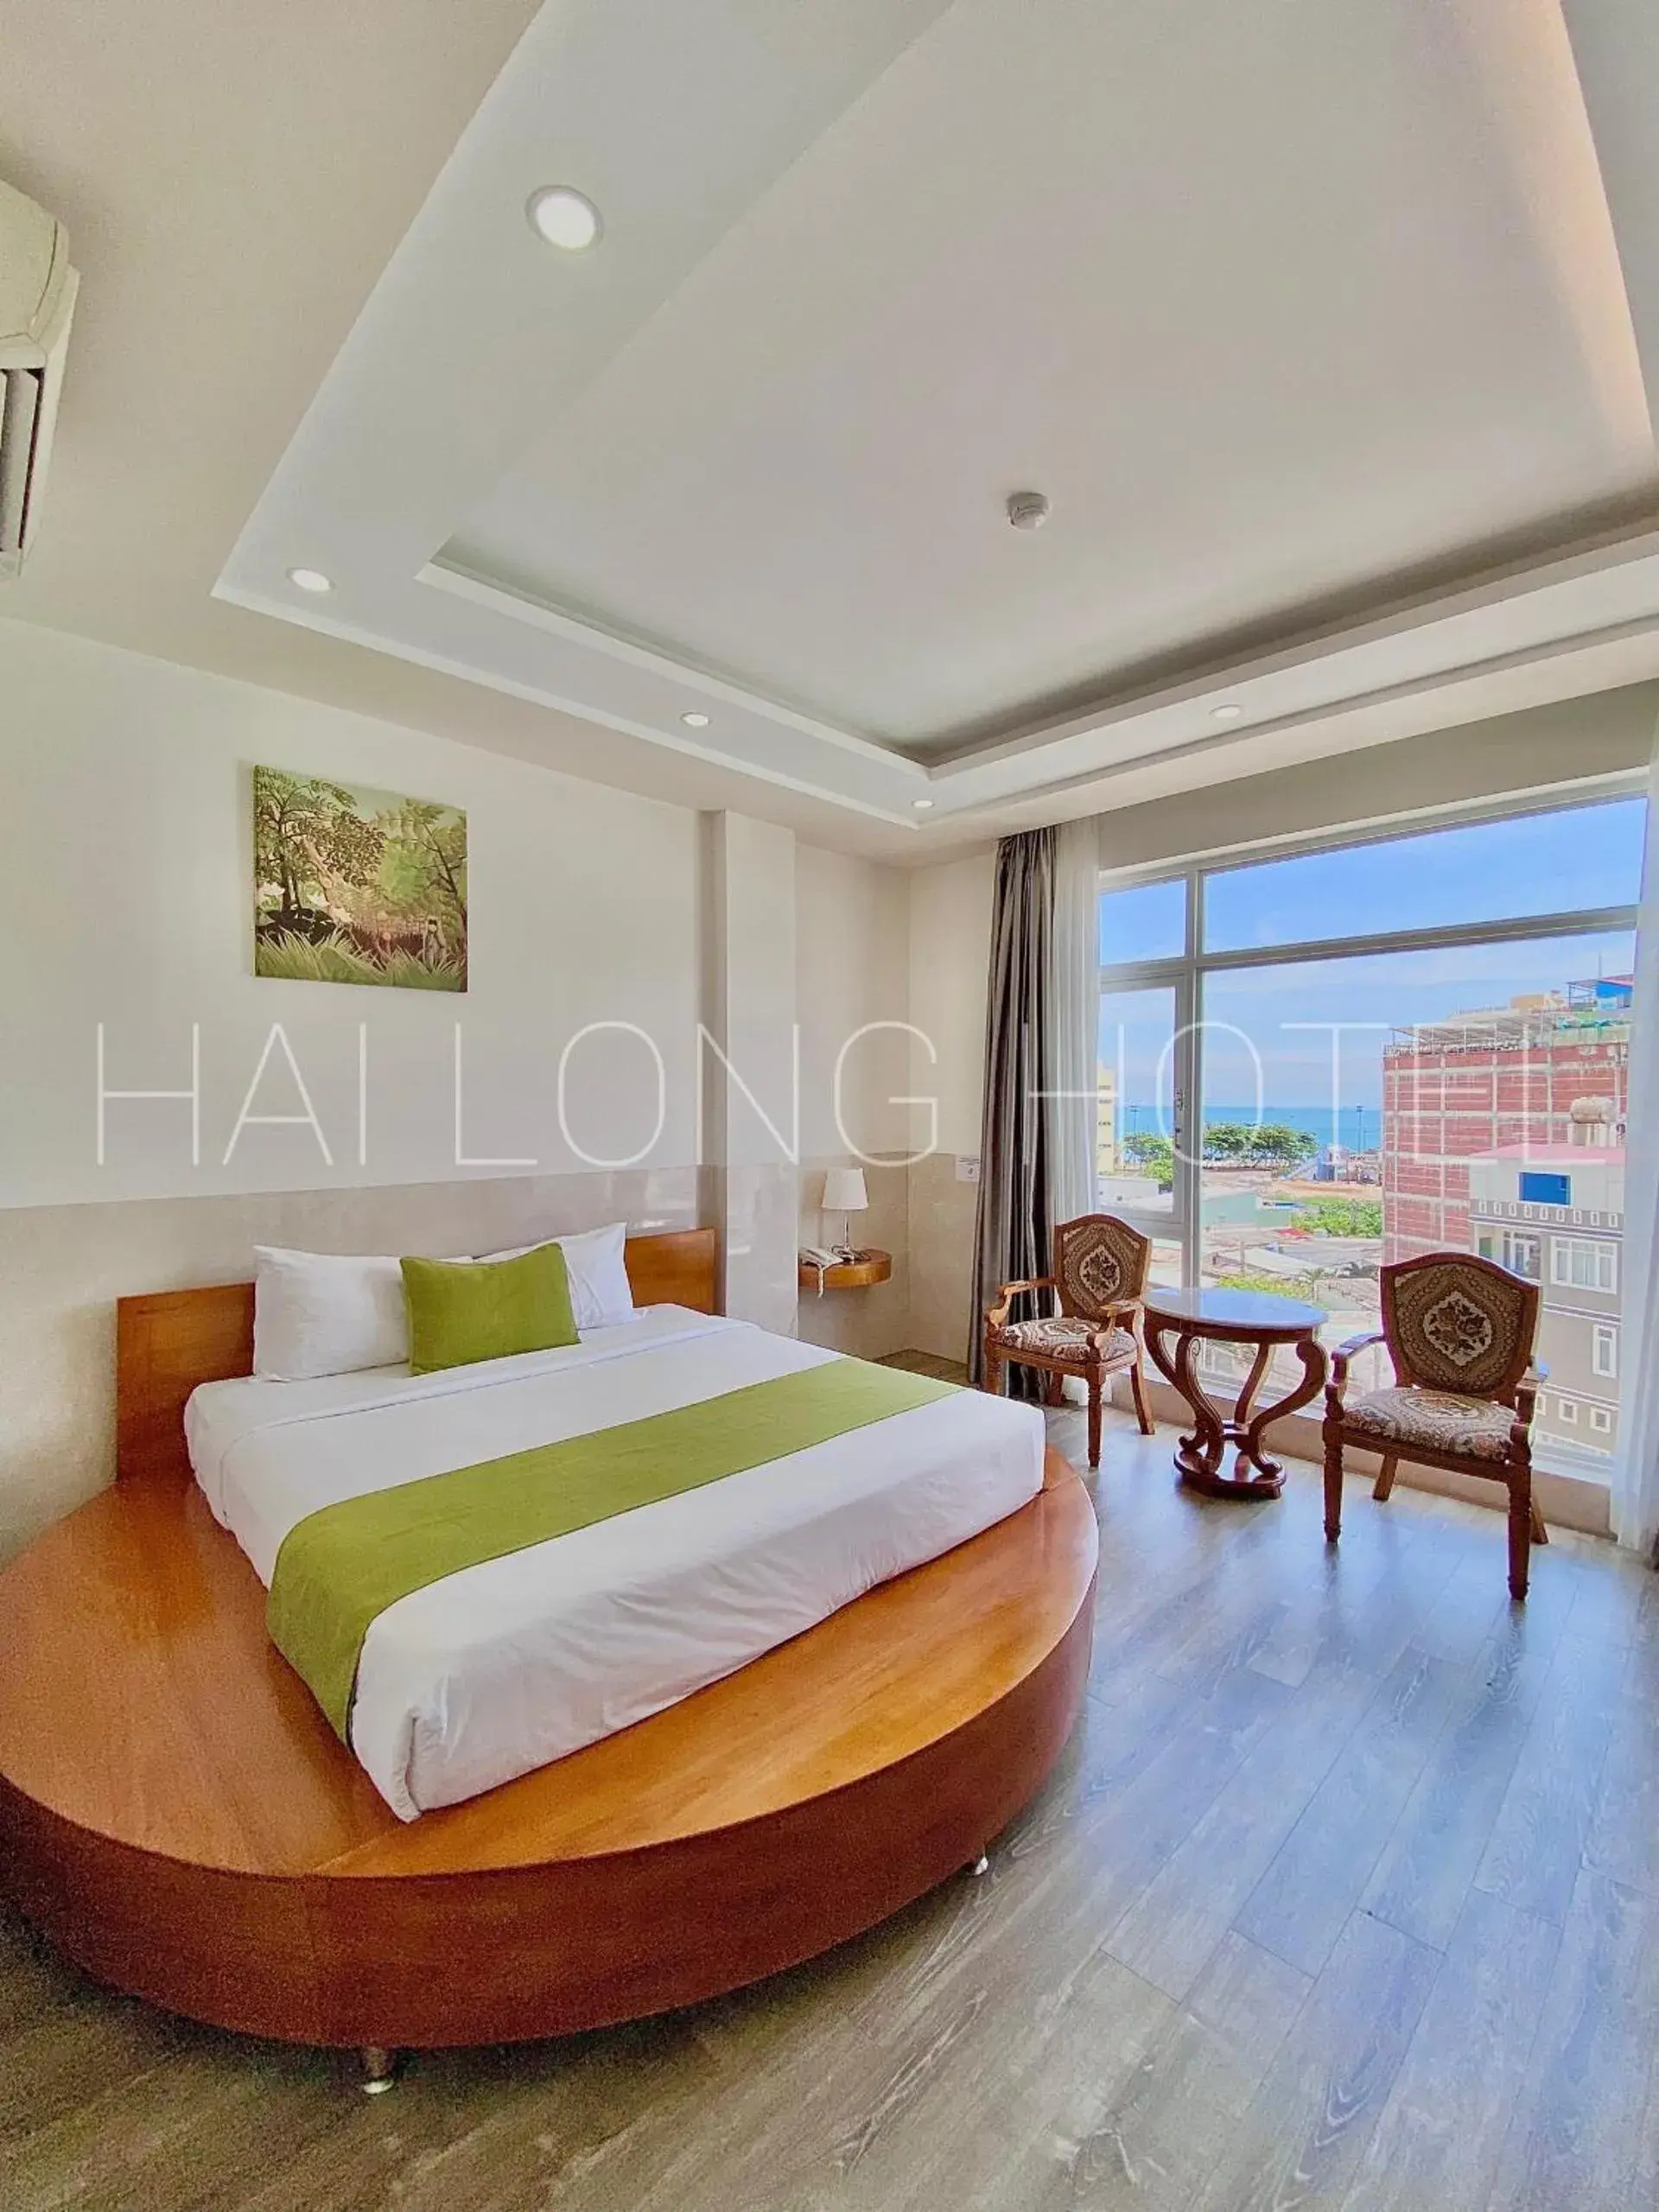 Photo of the whole room in Hai Long Hotel